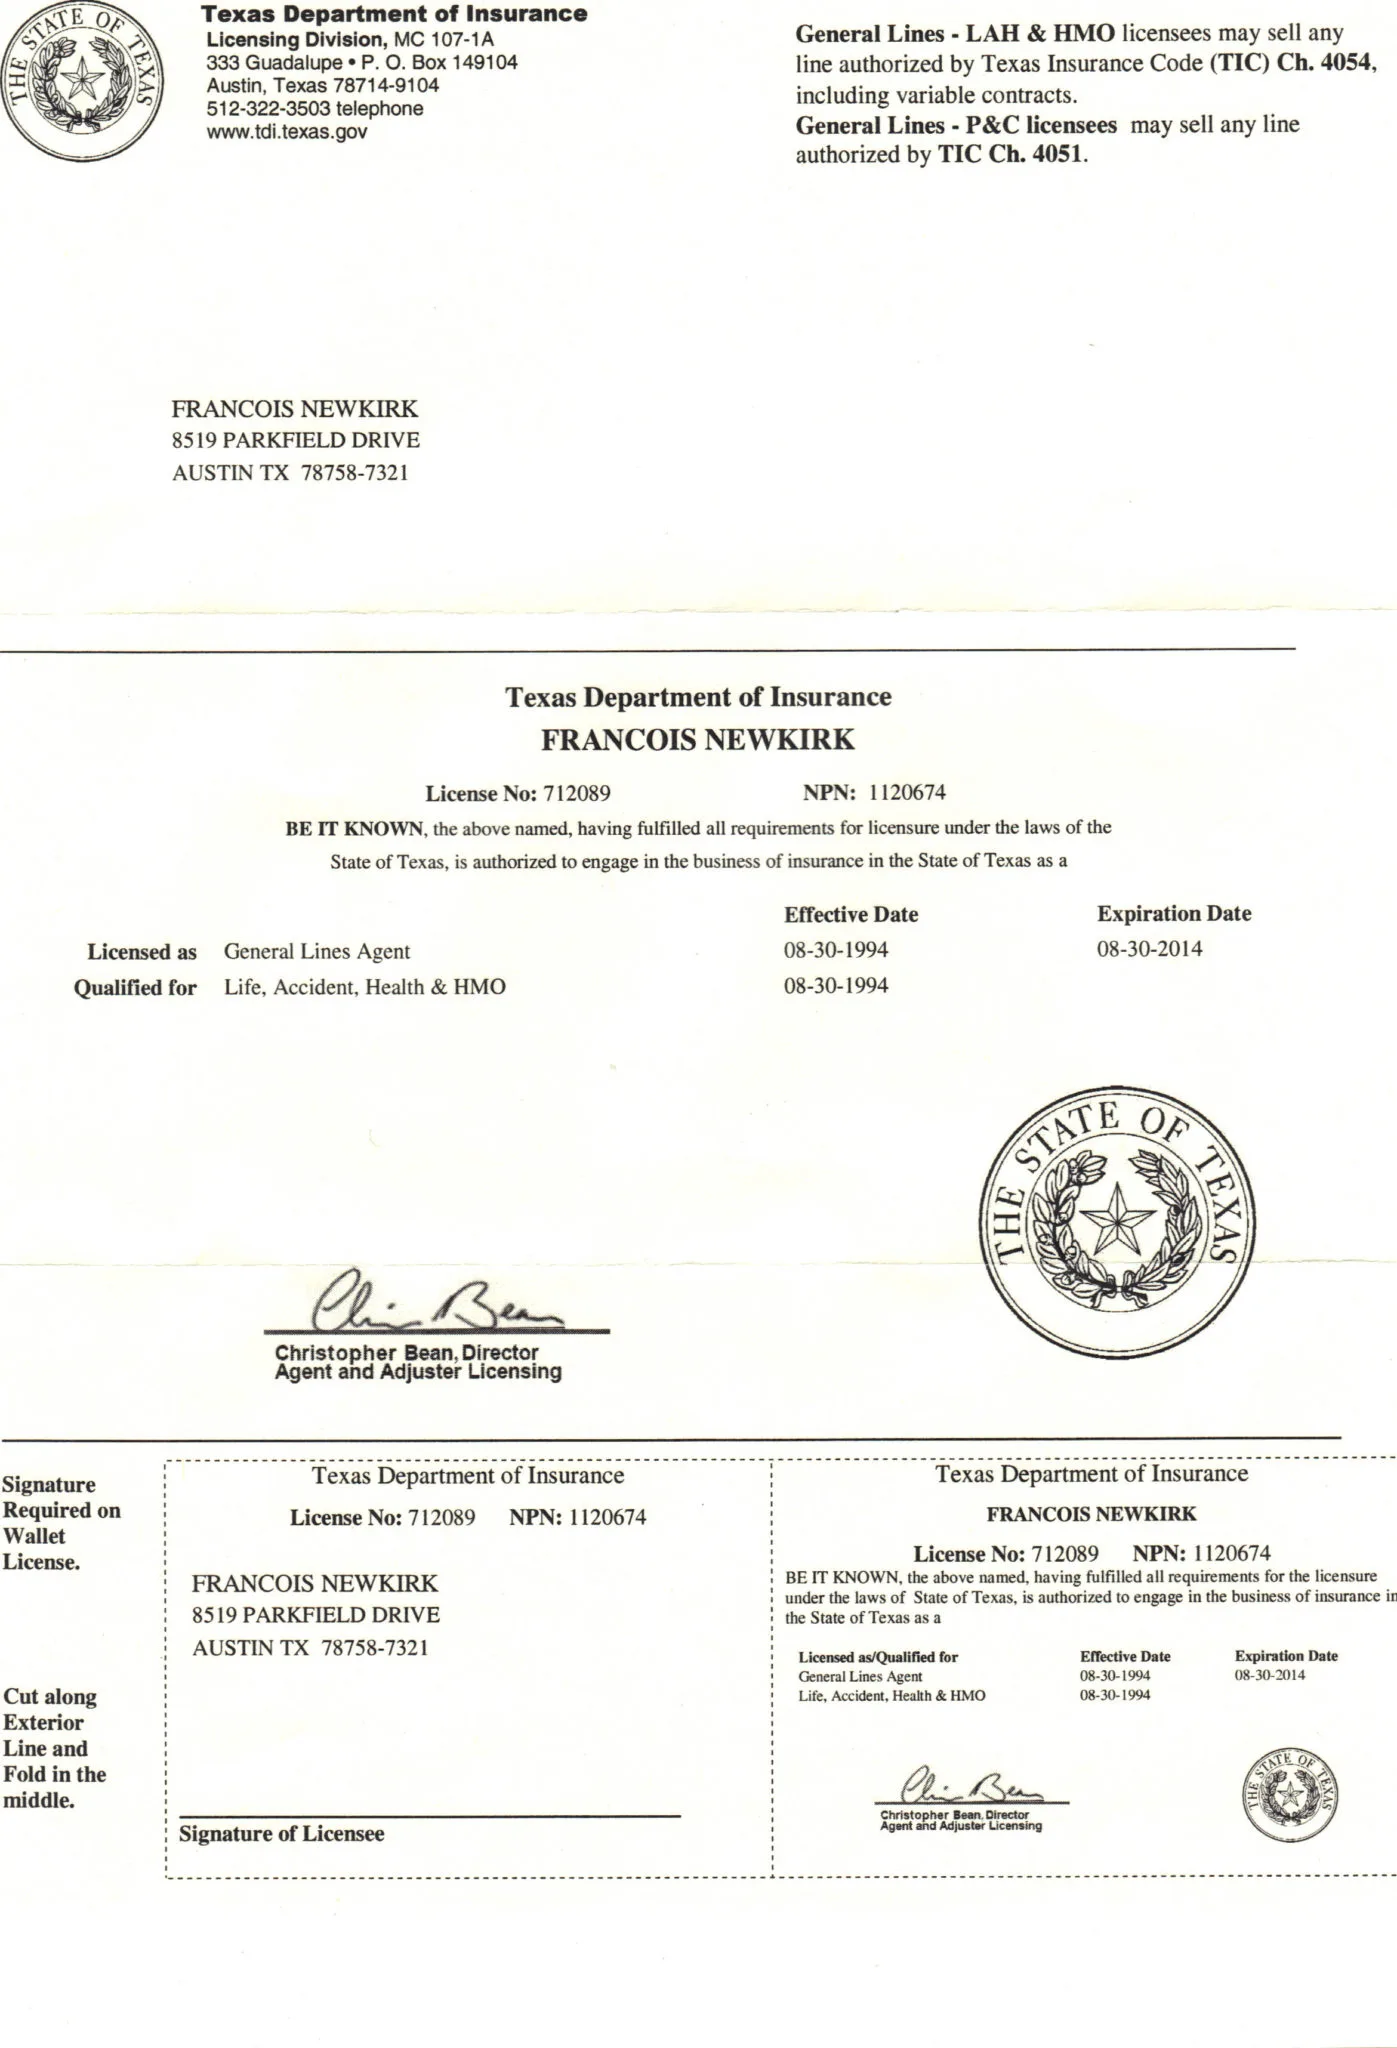 Texas Department of Insurance Certificate - Francois Newkirk - Texas Dry Out and Restoration